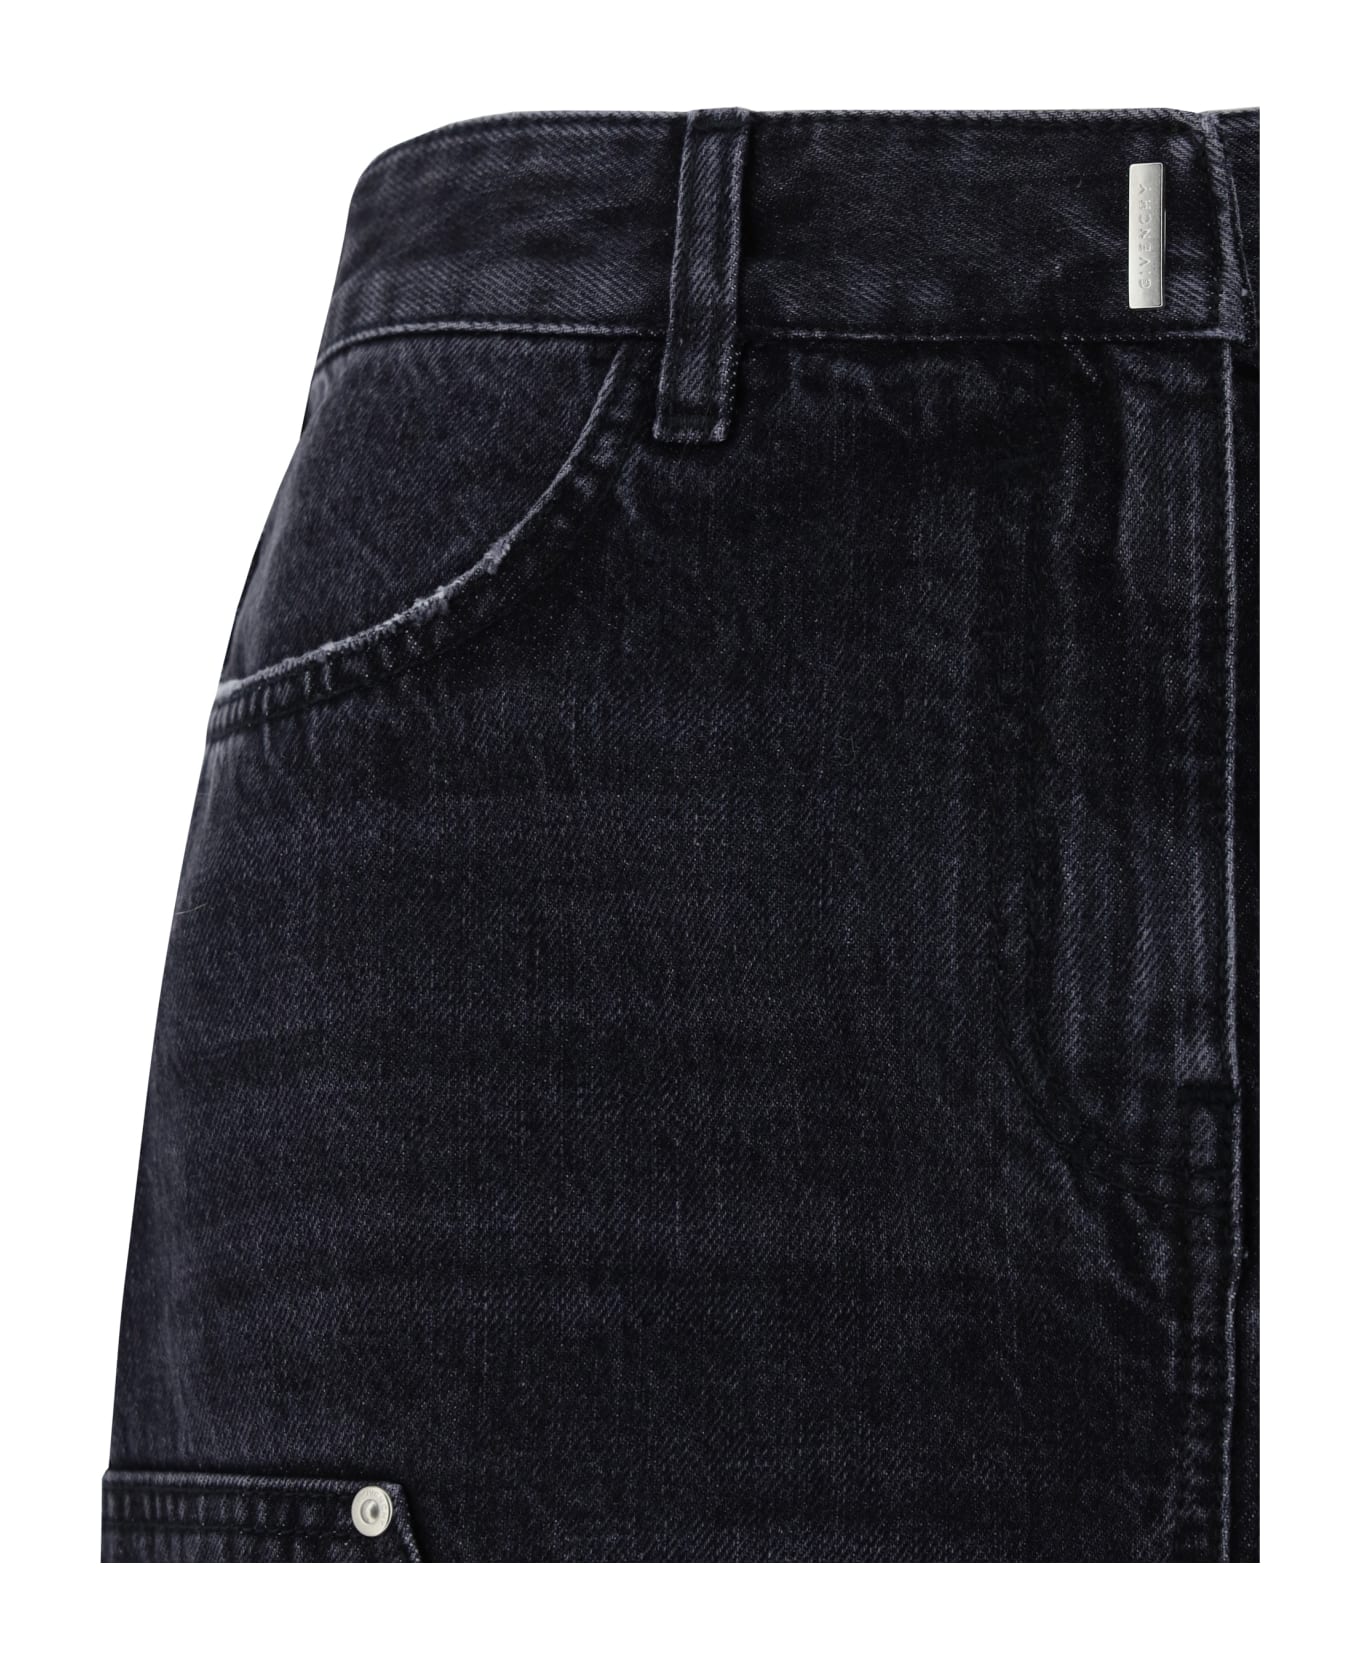 Givenchy padded Denim Cotton - Faded Black